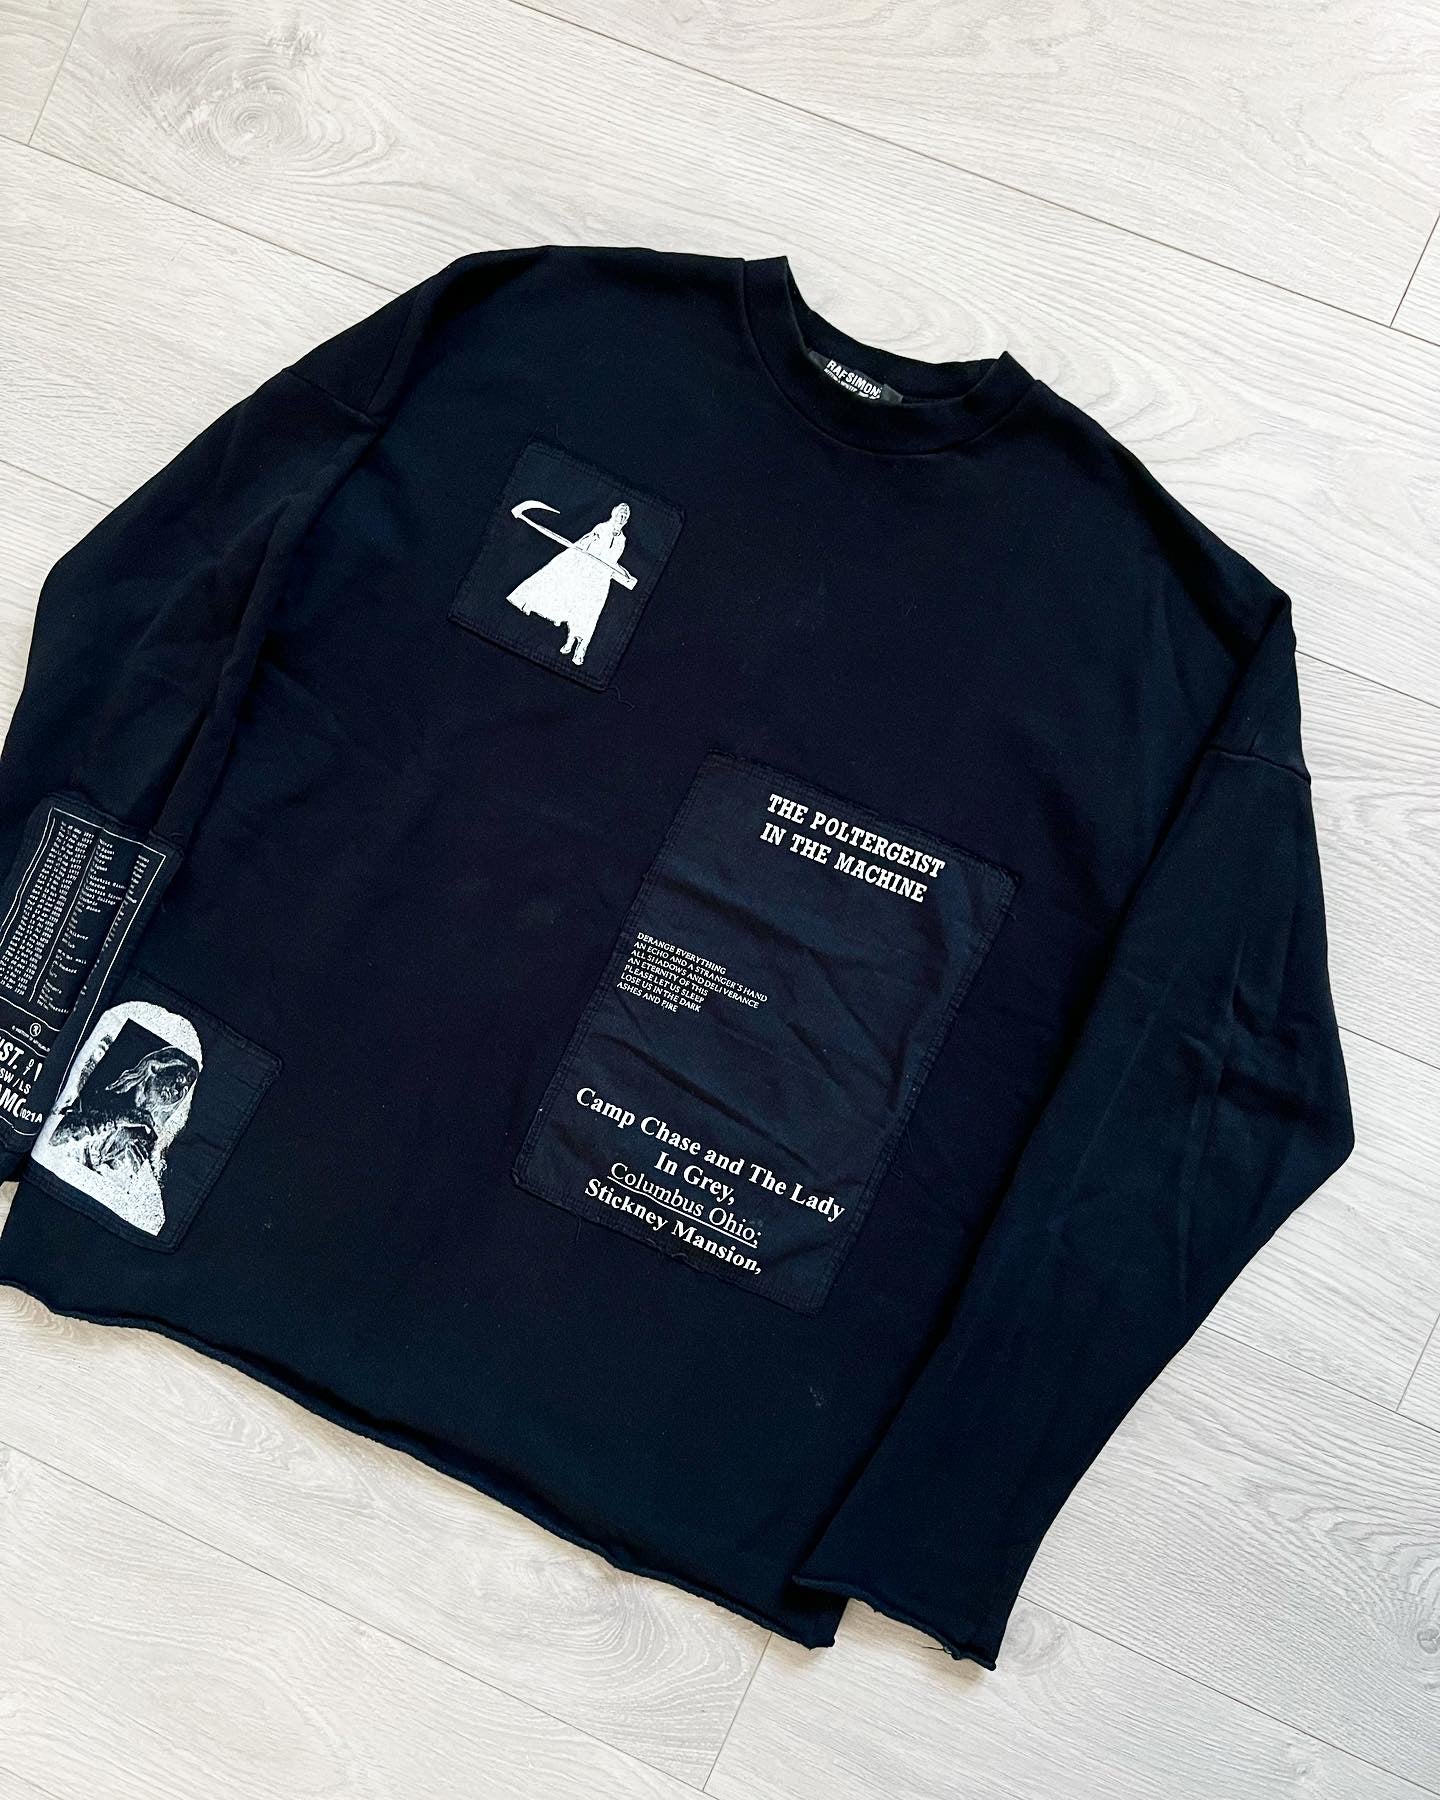 Raf Simons AW2005 Poltergeist ‘History Of My World’ Patch Sweater